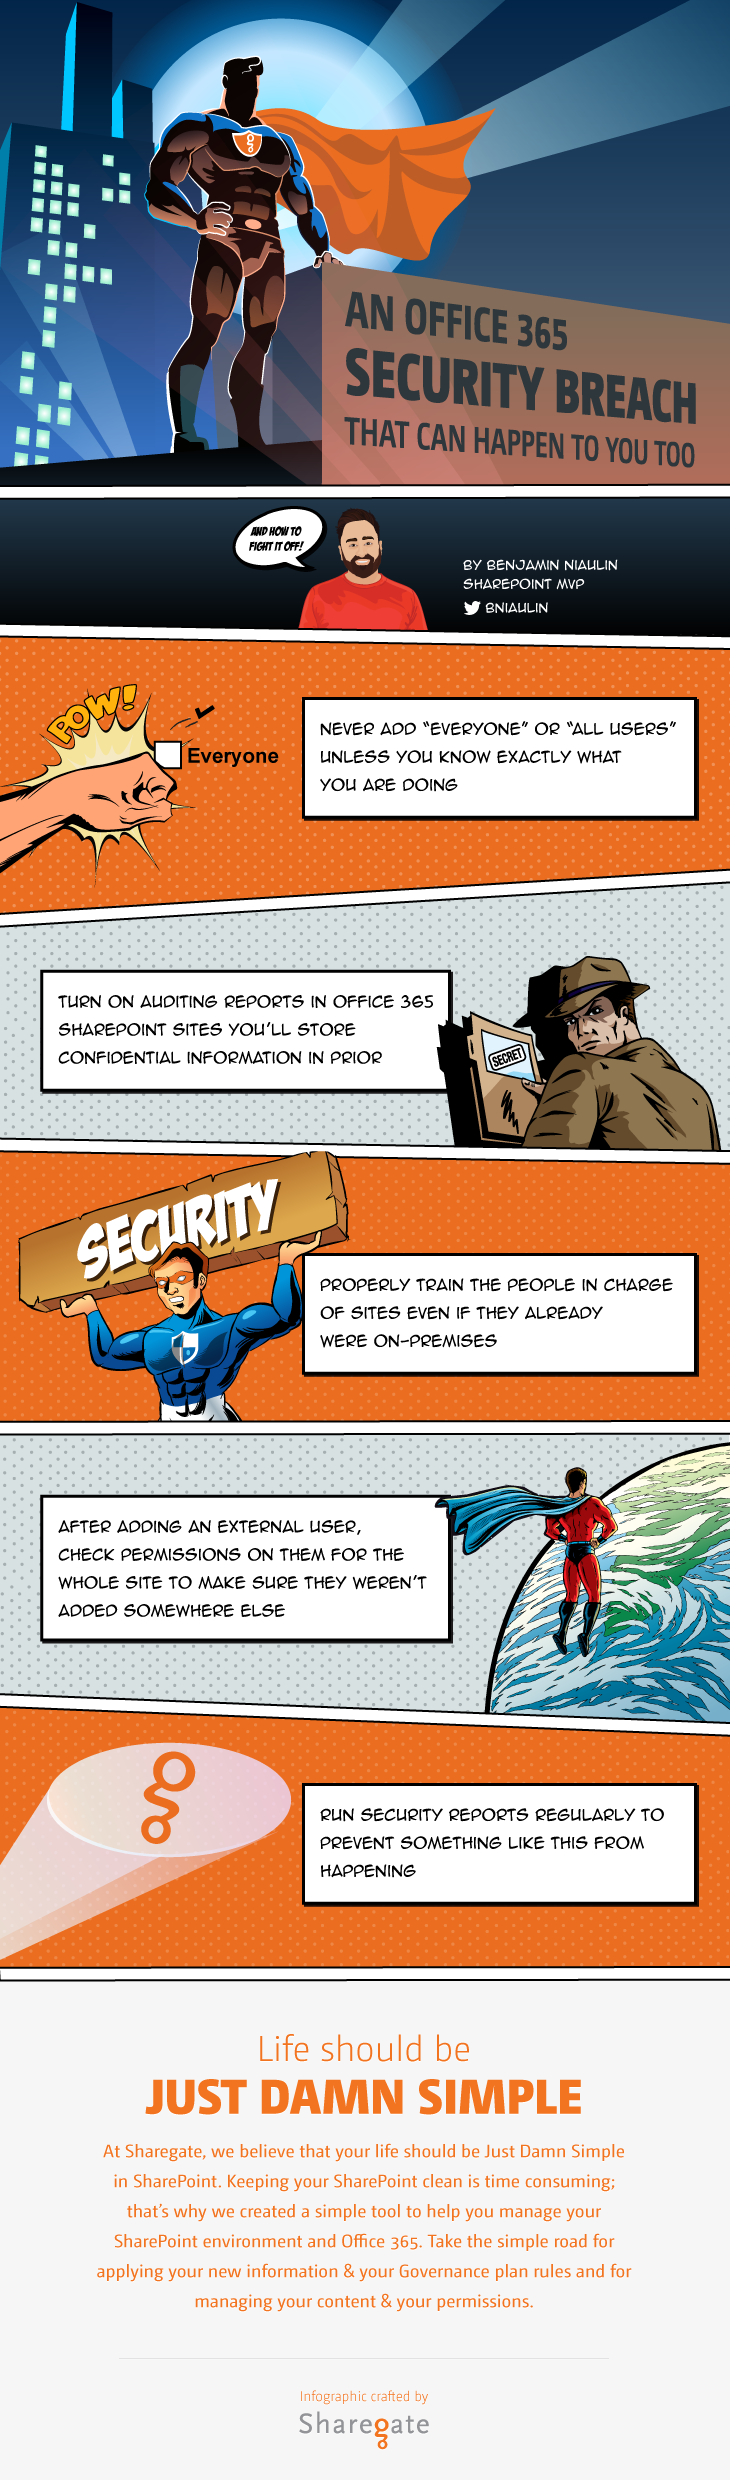 Office 365 SharePoint Security Breach Tips Infographic